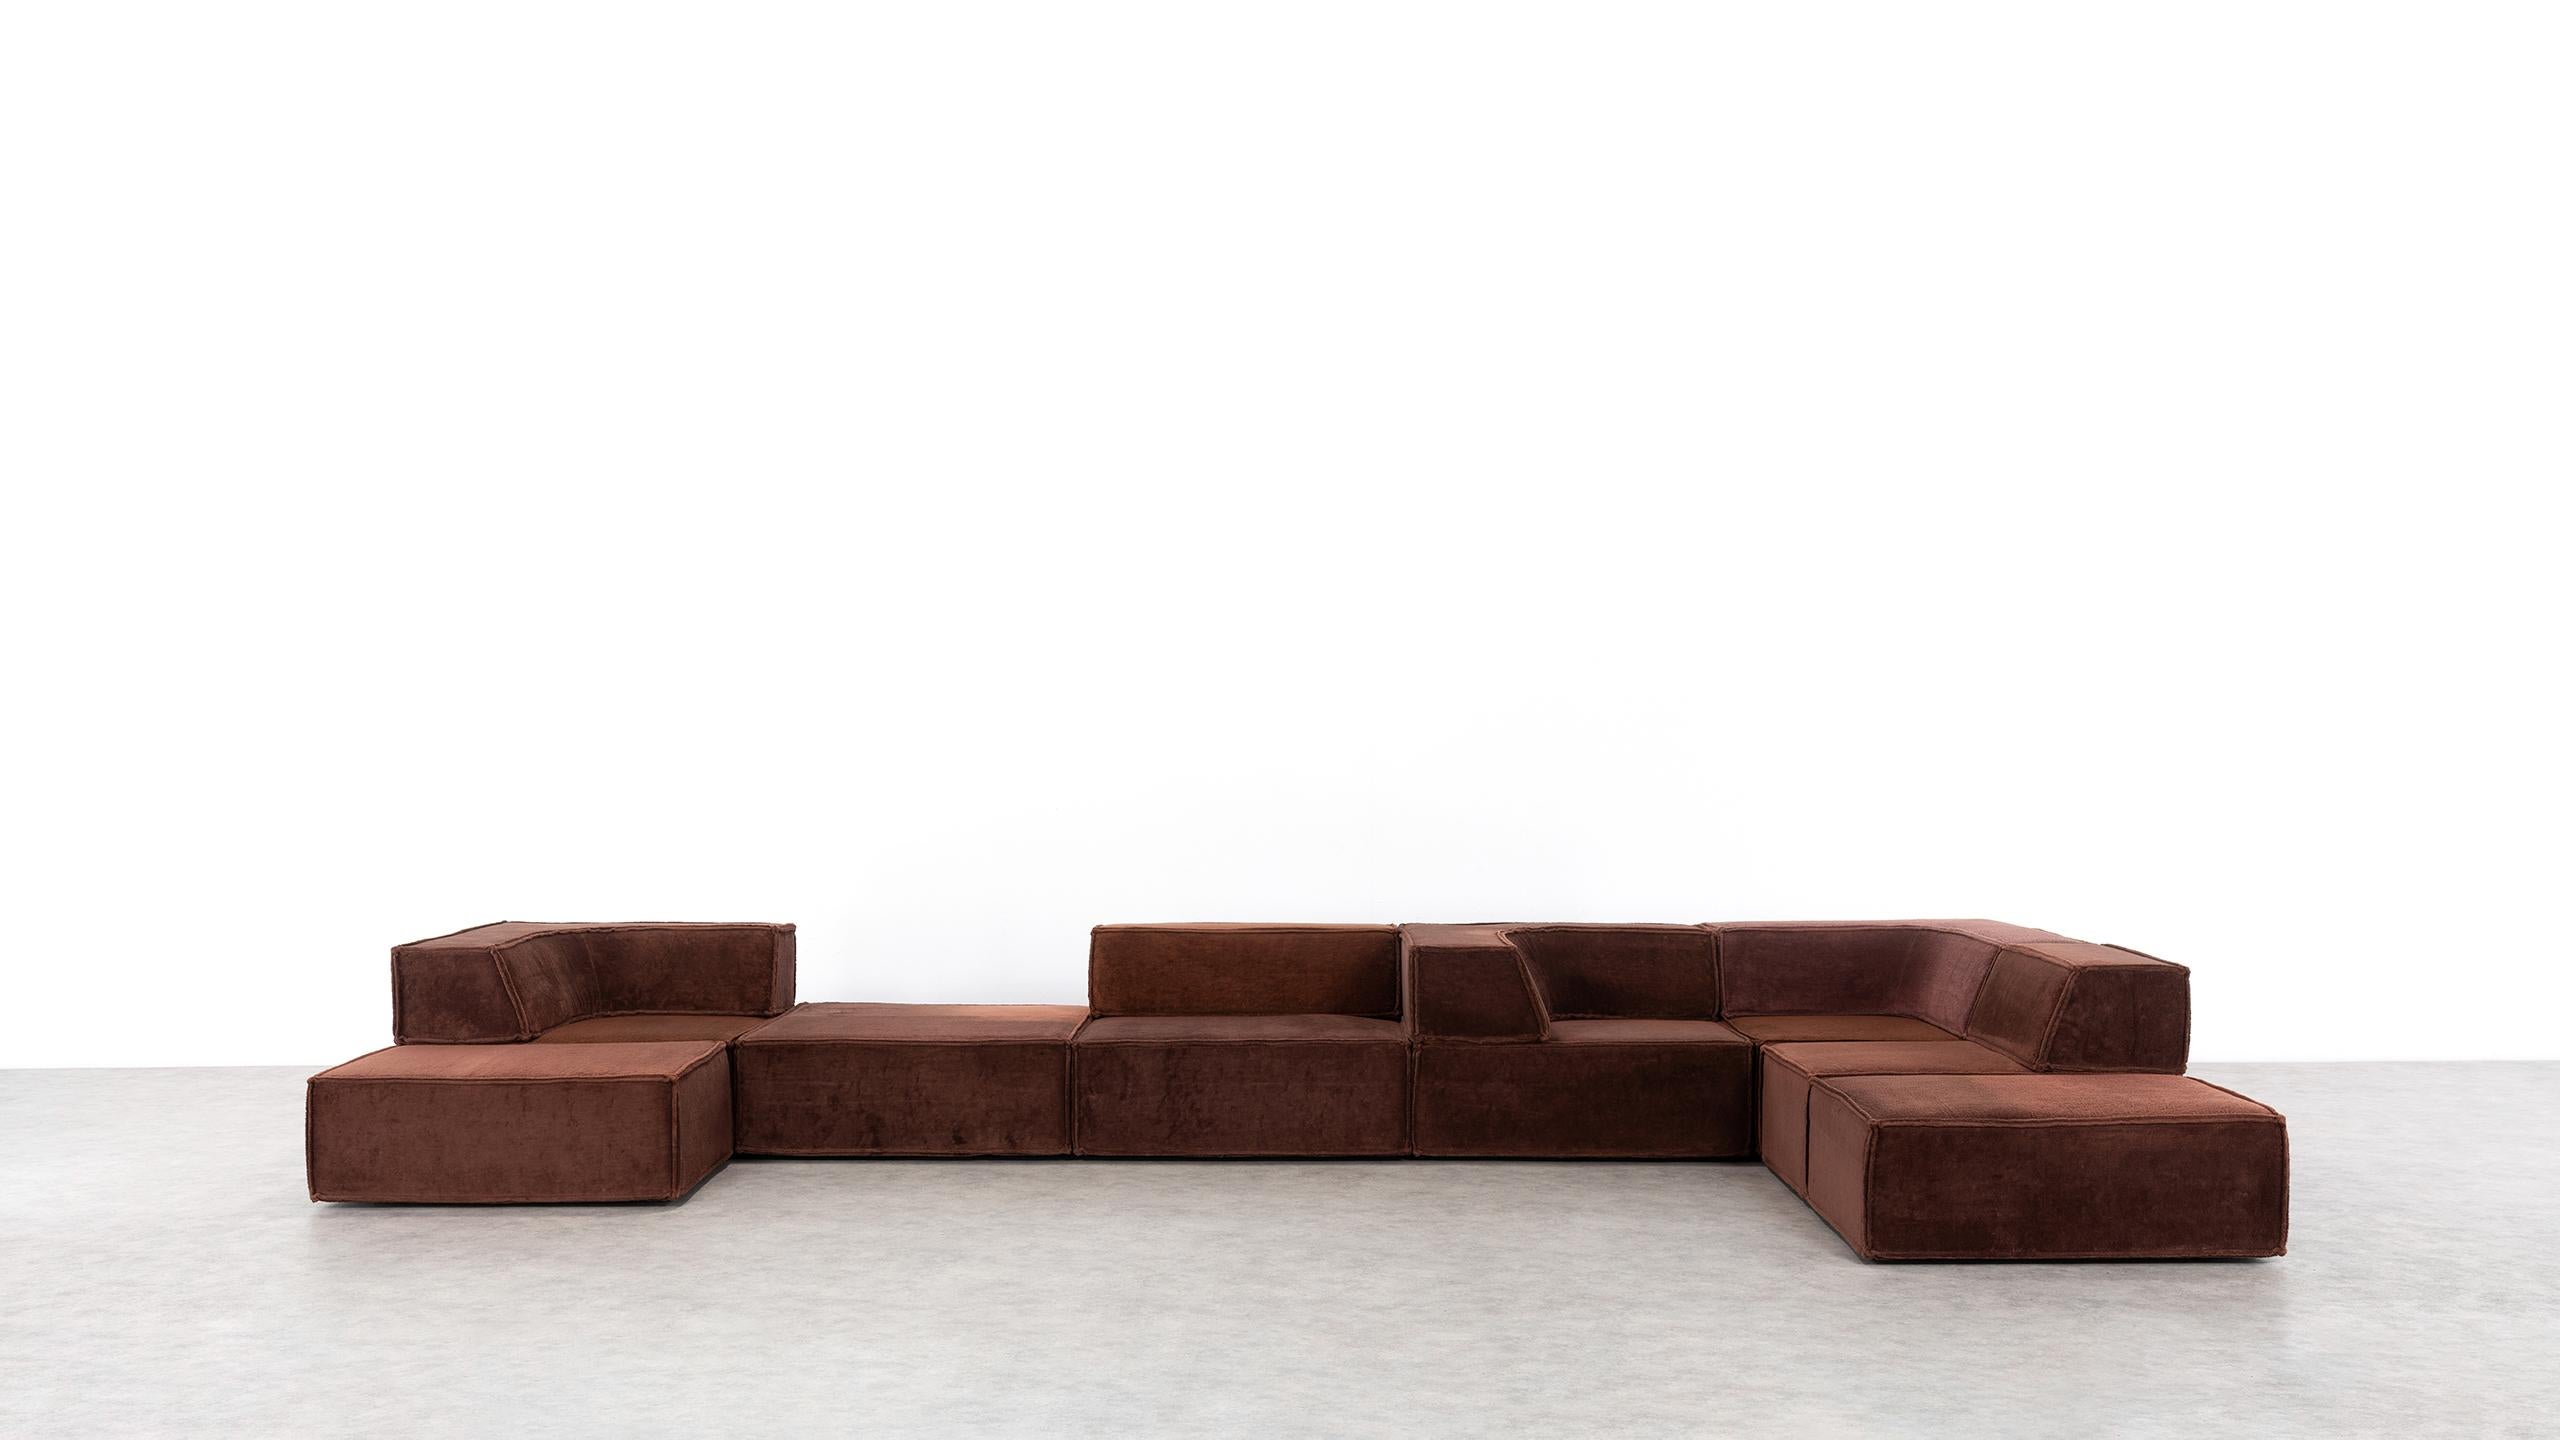 Mid-Century Modern COR Trio Modular Sofa, Giant Landscape in Chocolate Brown, 1972 by Team Form AG